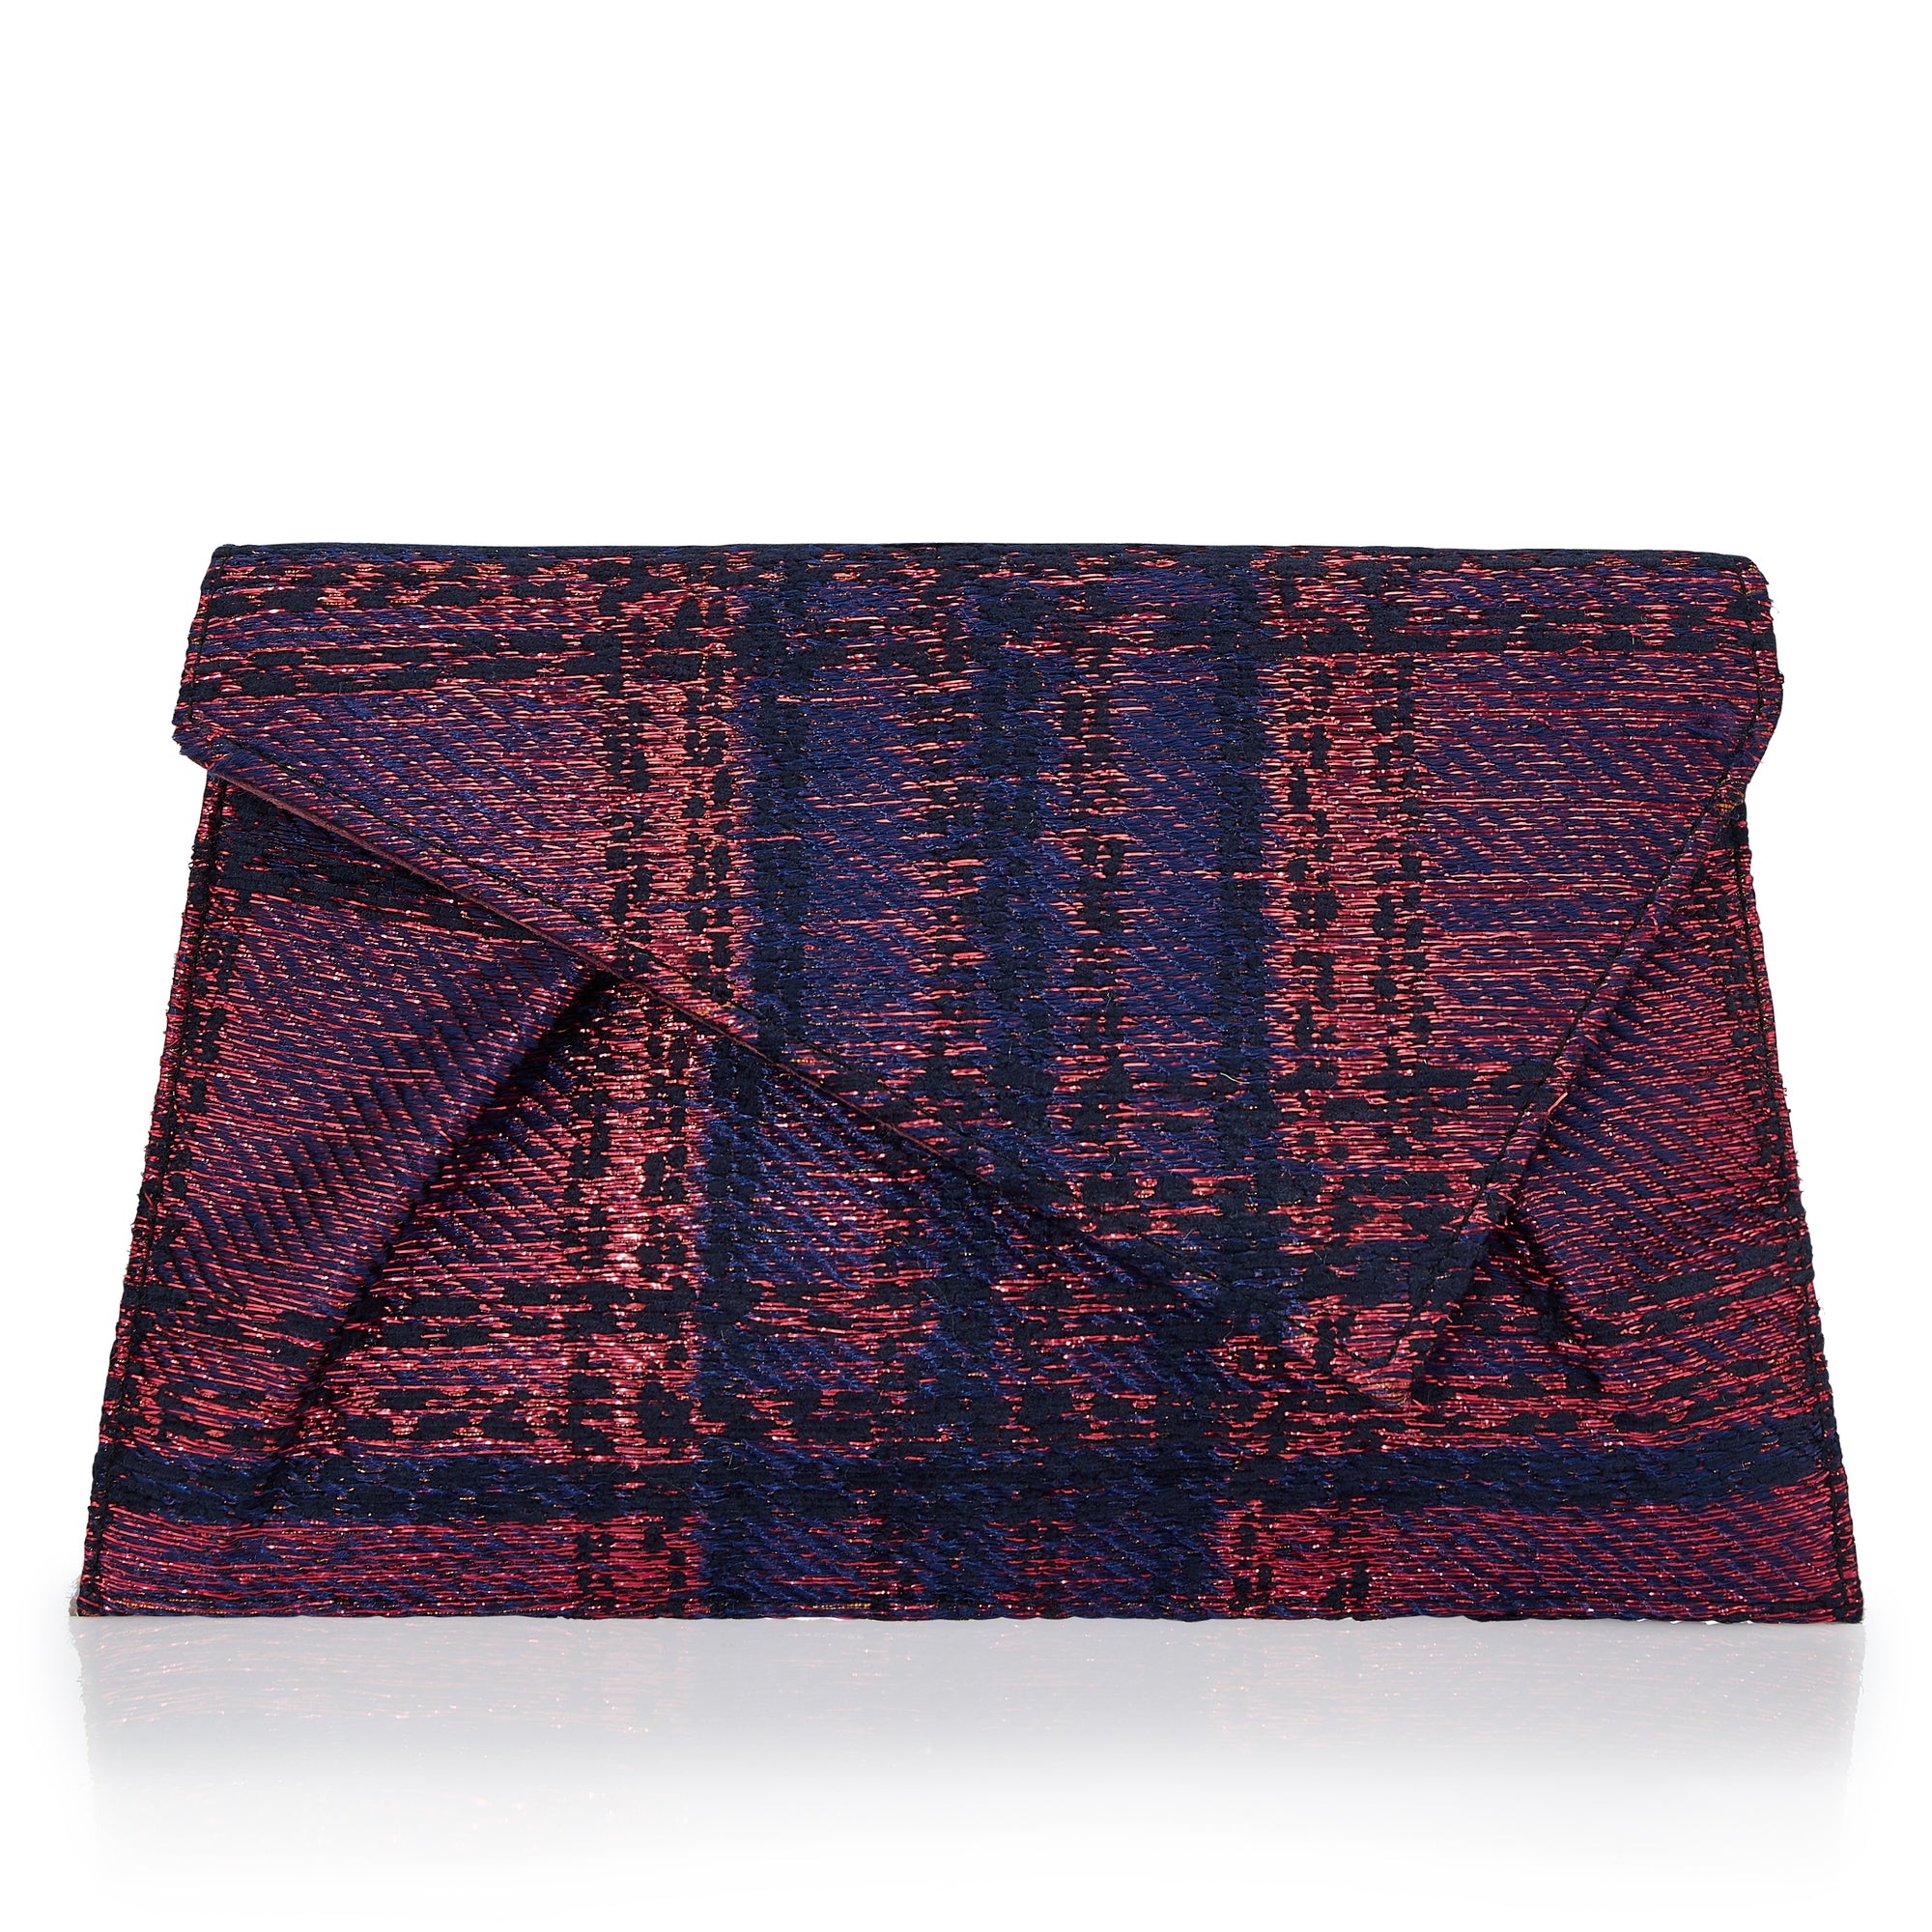 ENVELOPE BAG WITH NIGHT BLUE AND METALLIC RED FABRIC